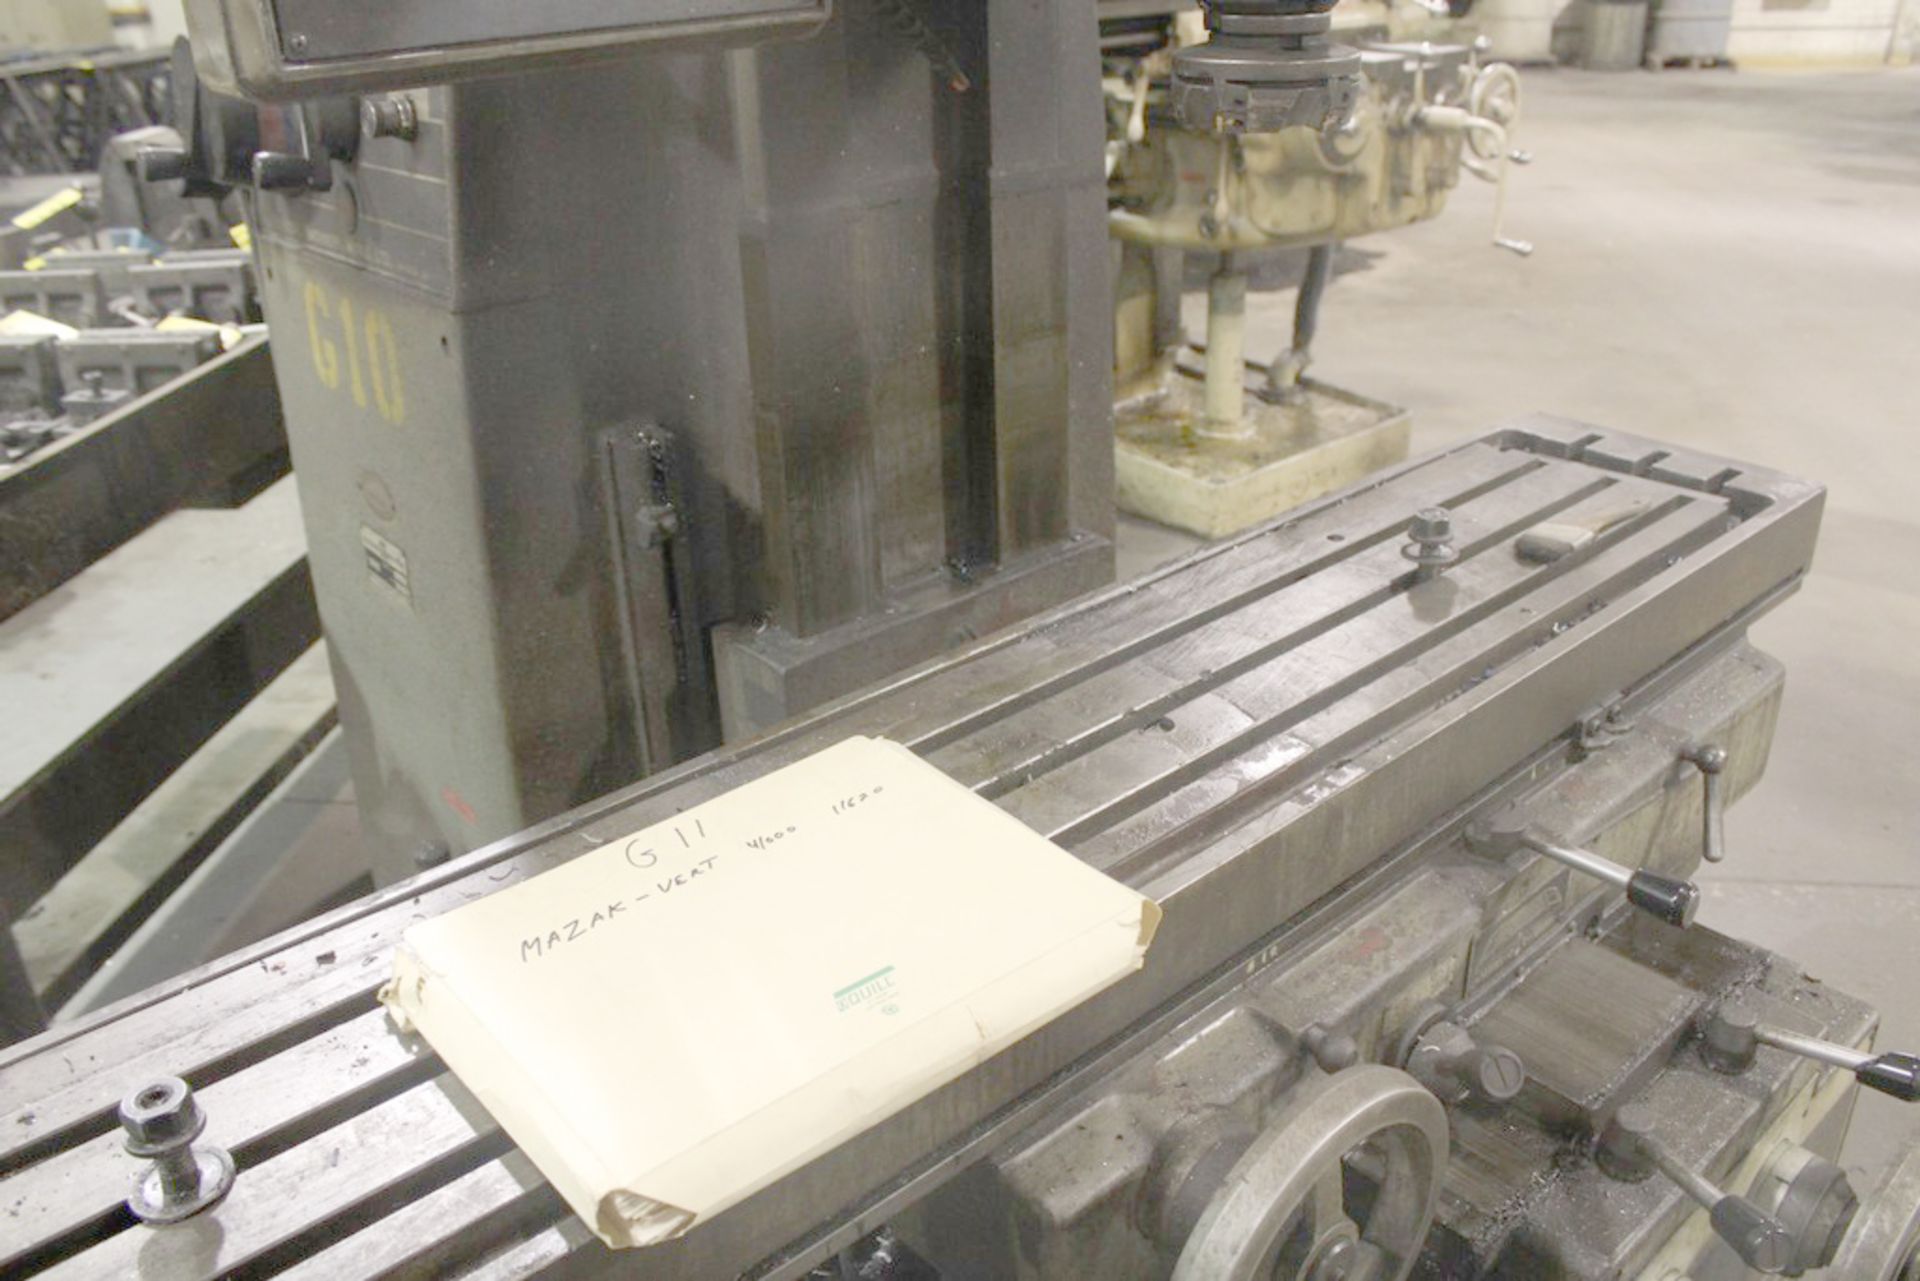 MAZAK MODEL V-1000 VERTICAL MILL, S/N 11695, 12”X63” TABLE, 1500 RPM SPINDLE - Image 2 of 7